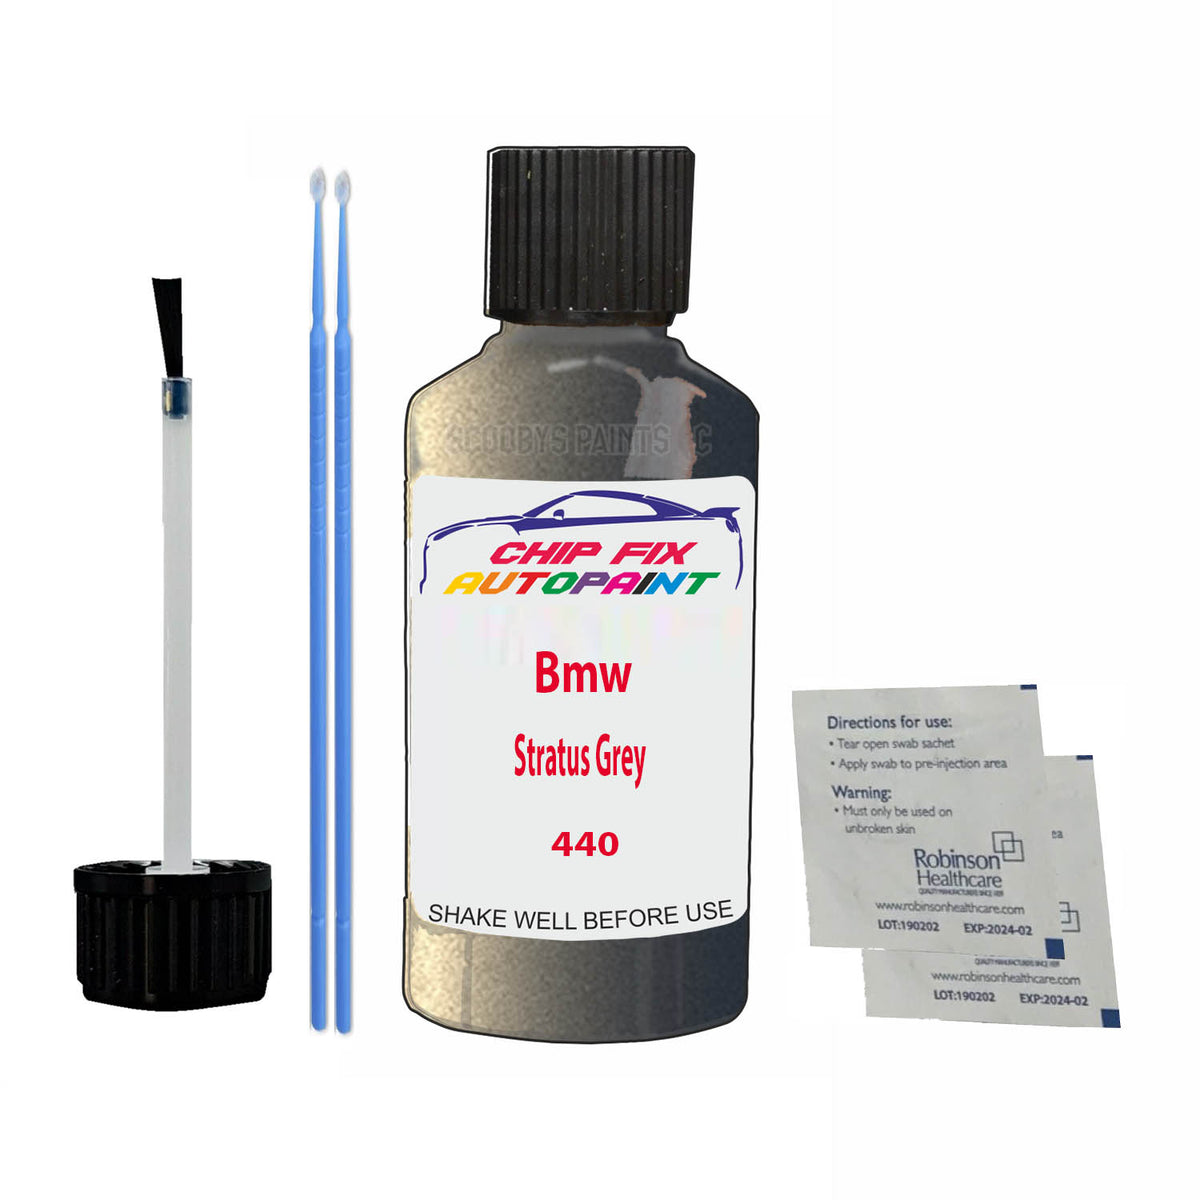 FOR Bmw Stratus Grey Touch Up Paint Code 440 Scratch Repair Kit